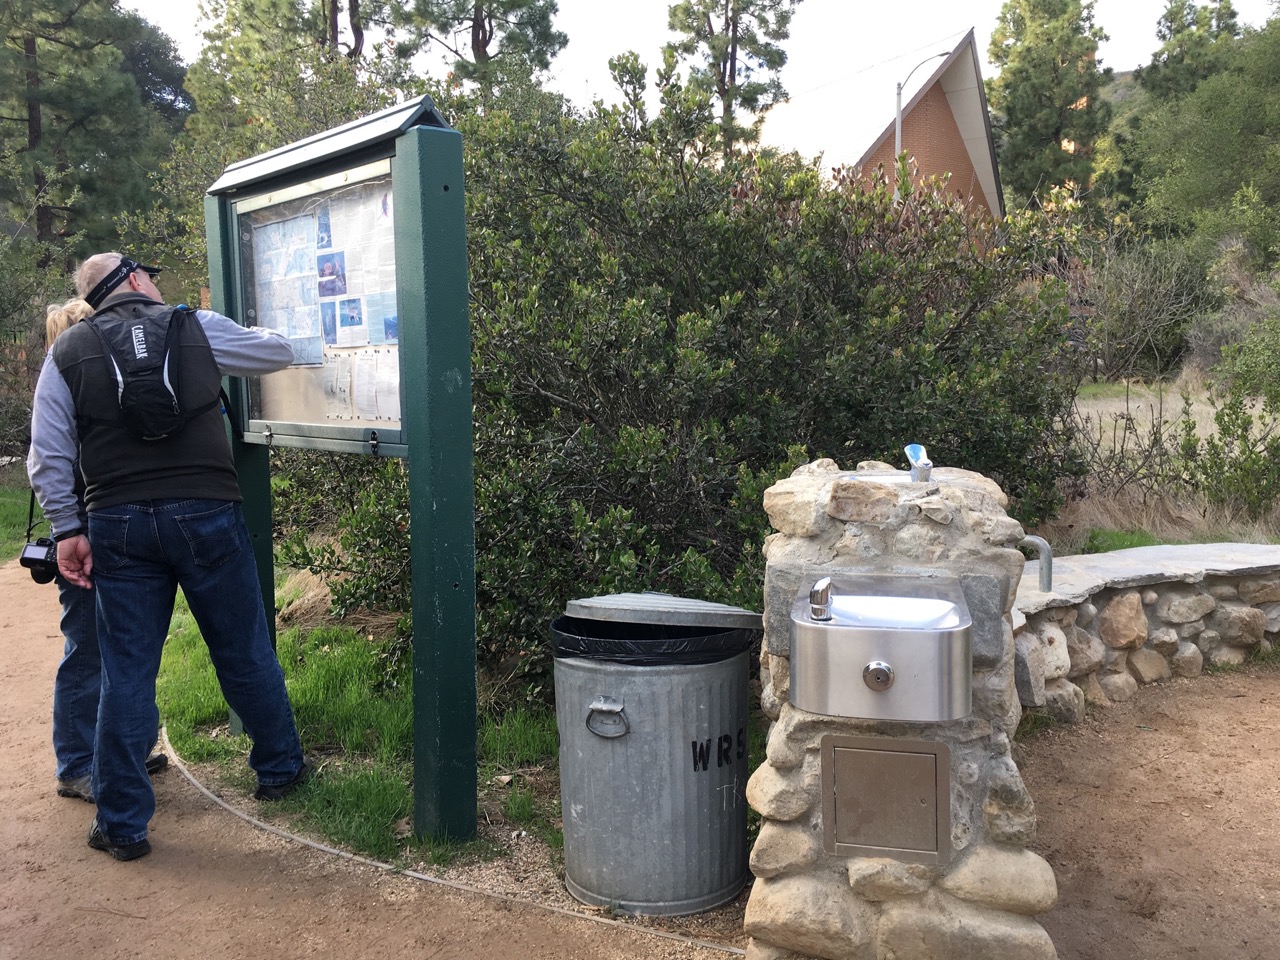 Bathrooms and drinking fountains at the trailhead of Los Leones Canyon 